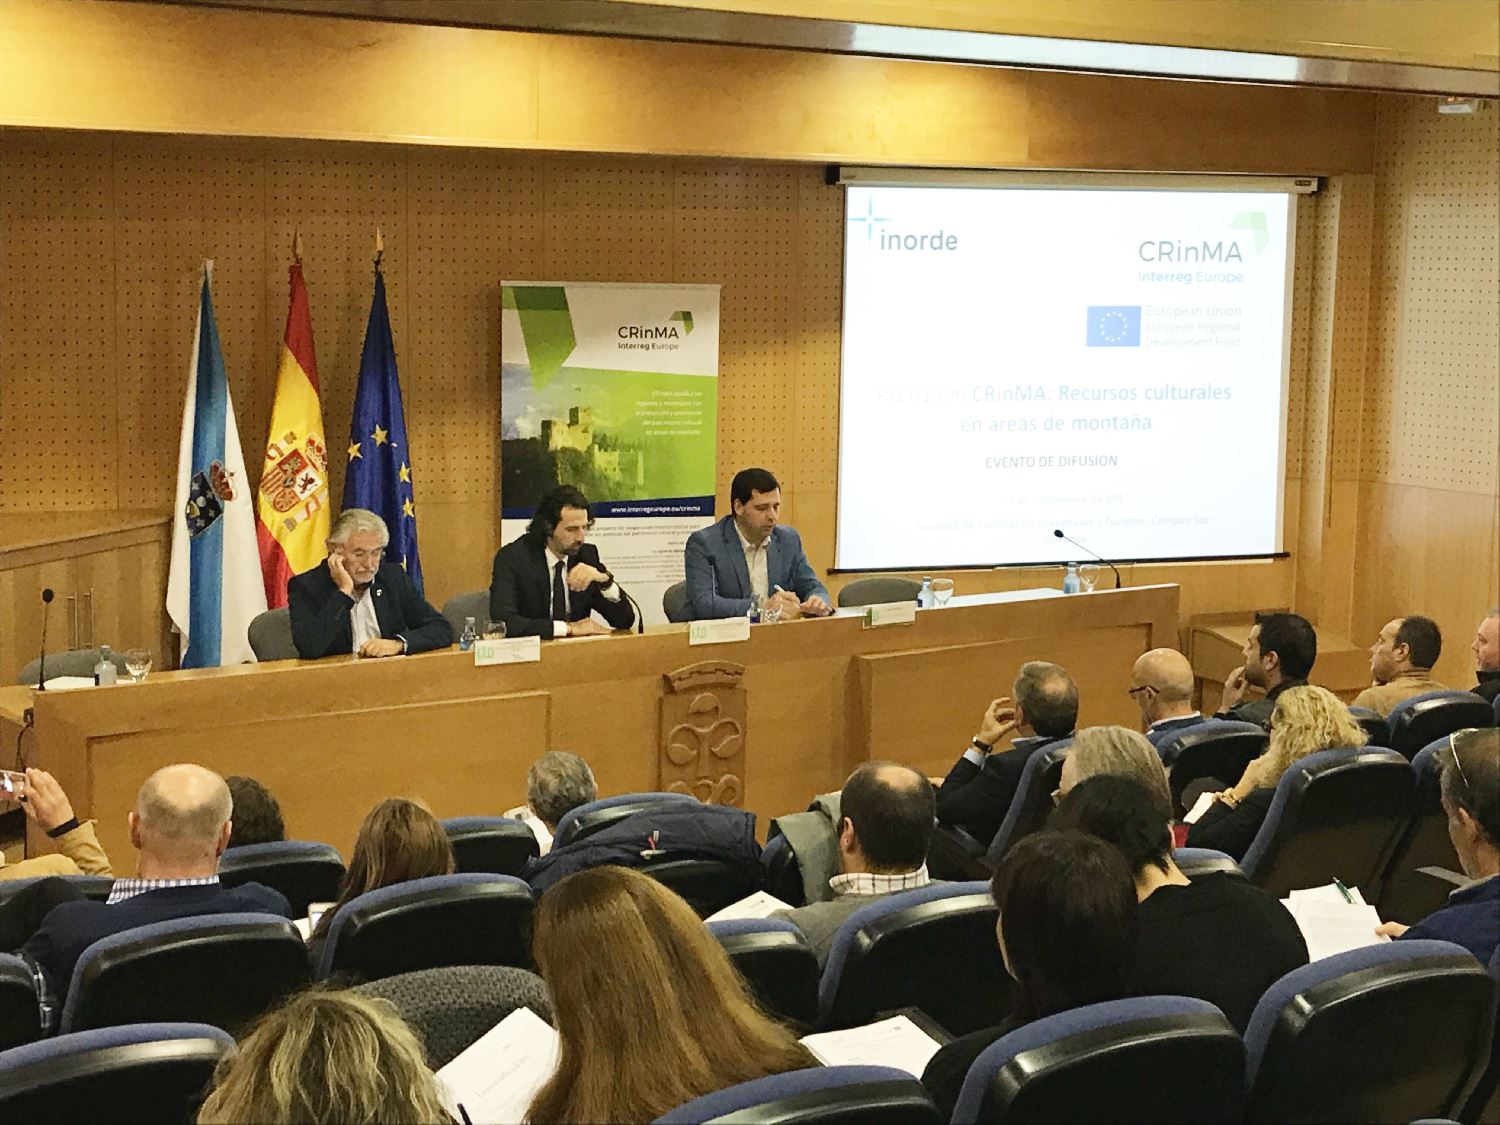 Joint Dissemination event in Ourense